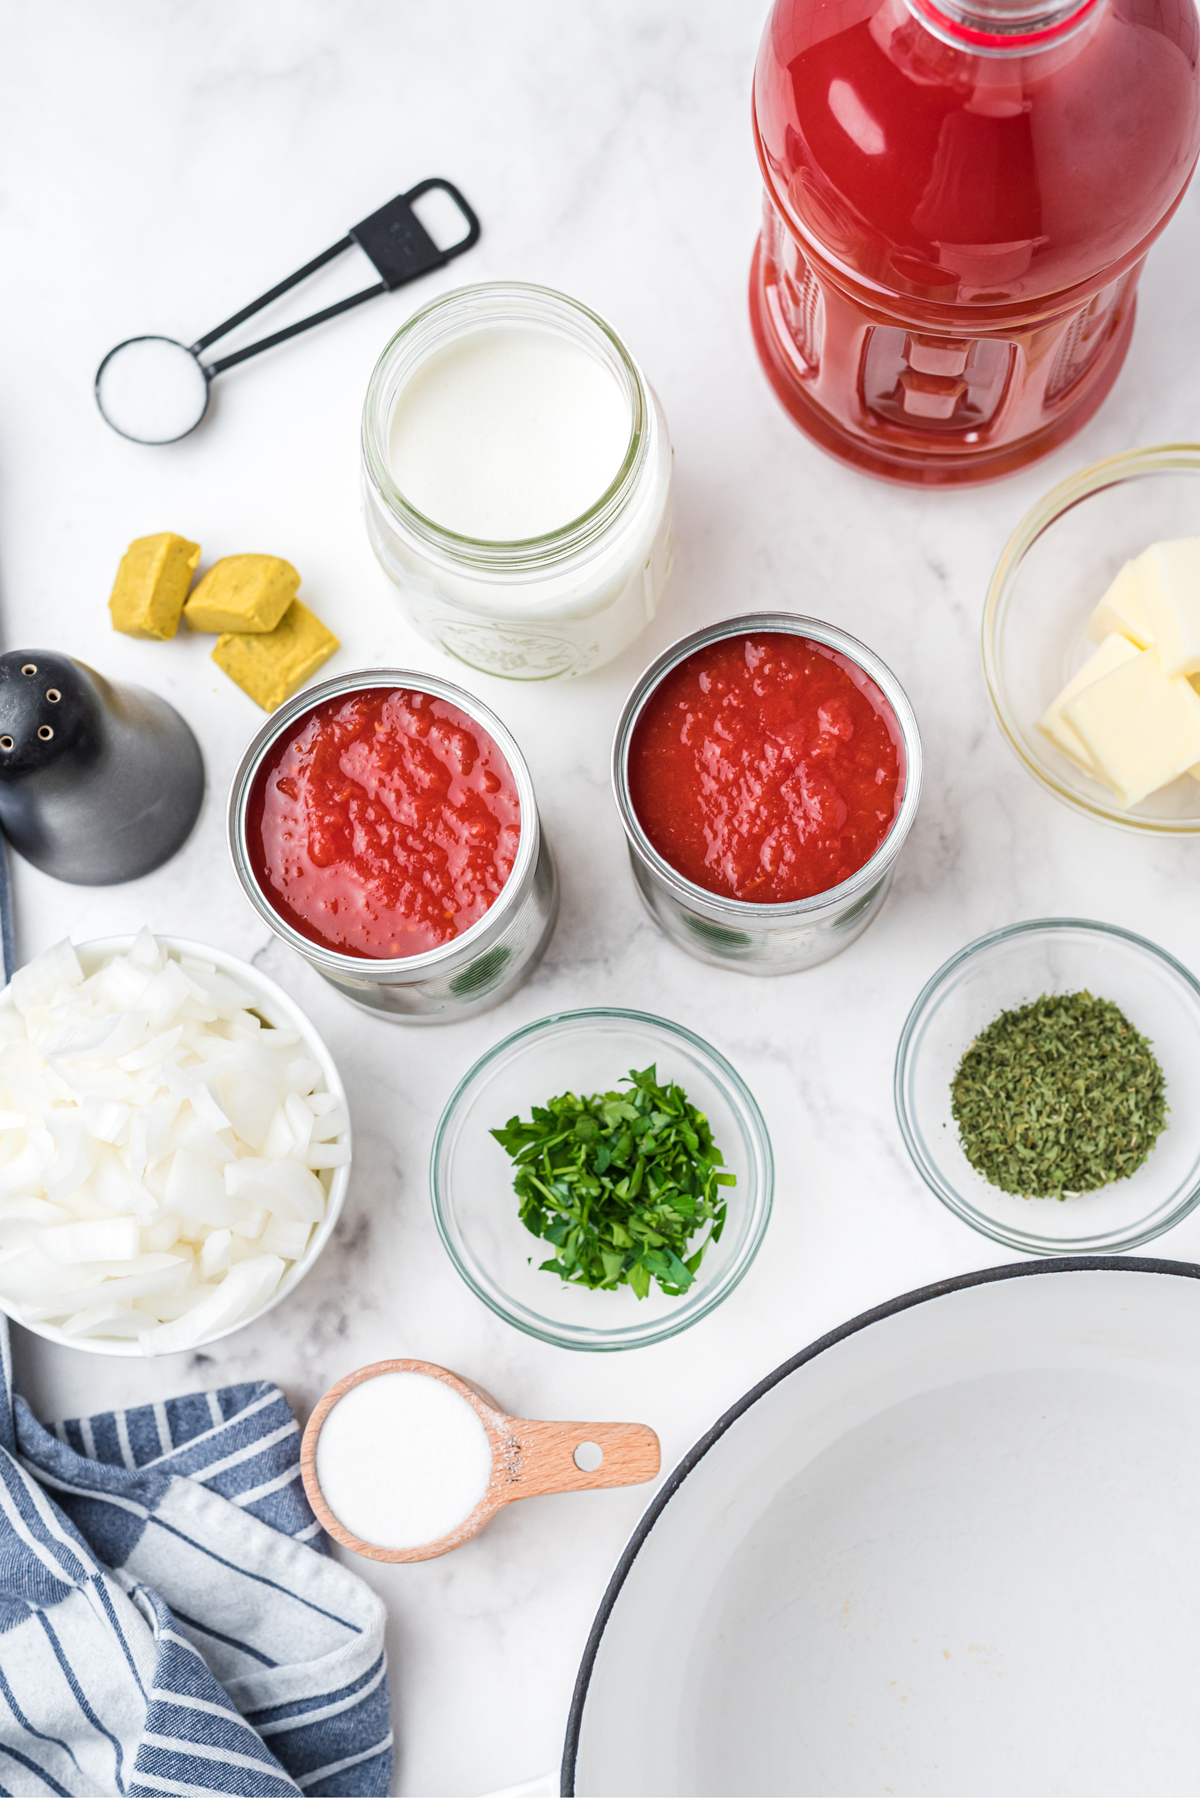 Ingredients of tomato soup on a white counter. These are the following: onion, butter, crushed tomatoes, tomato juice, sugar, chicken bouillon cubes, heavy cream, parsley, dried basil, salt, and pepper.